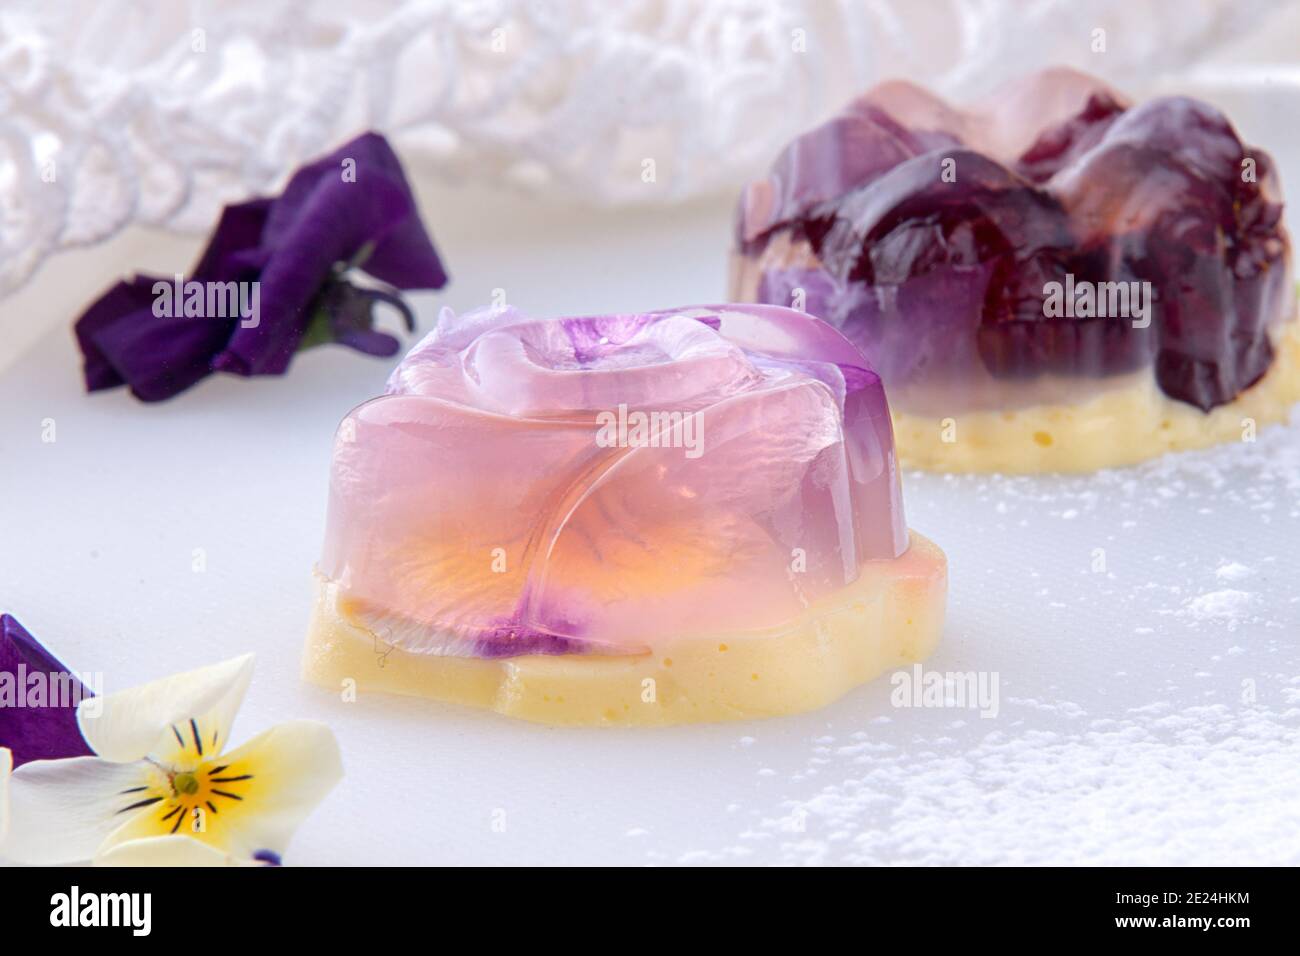 Unique japanese dessert Havaro of jelly and bavarian cream with edible violet flowers. Gelatin healthy eating dessert. Stock Photo